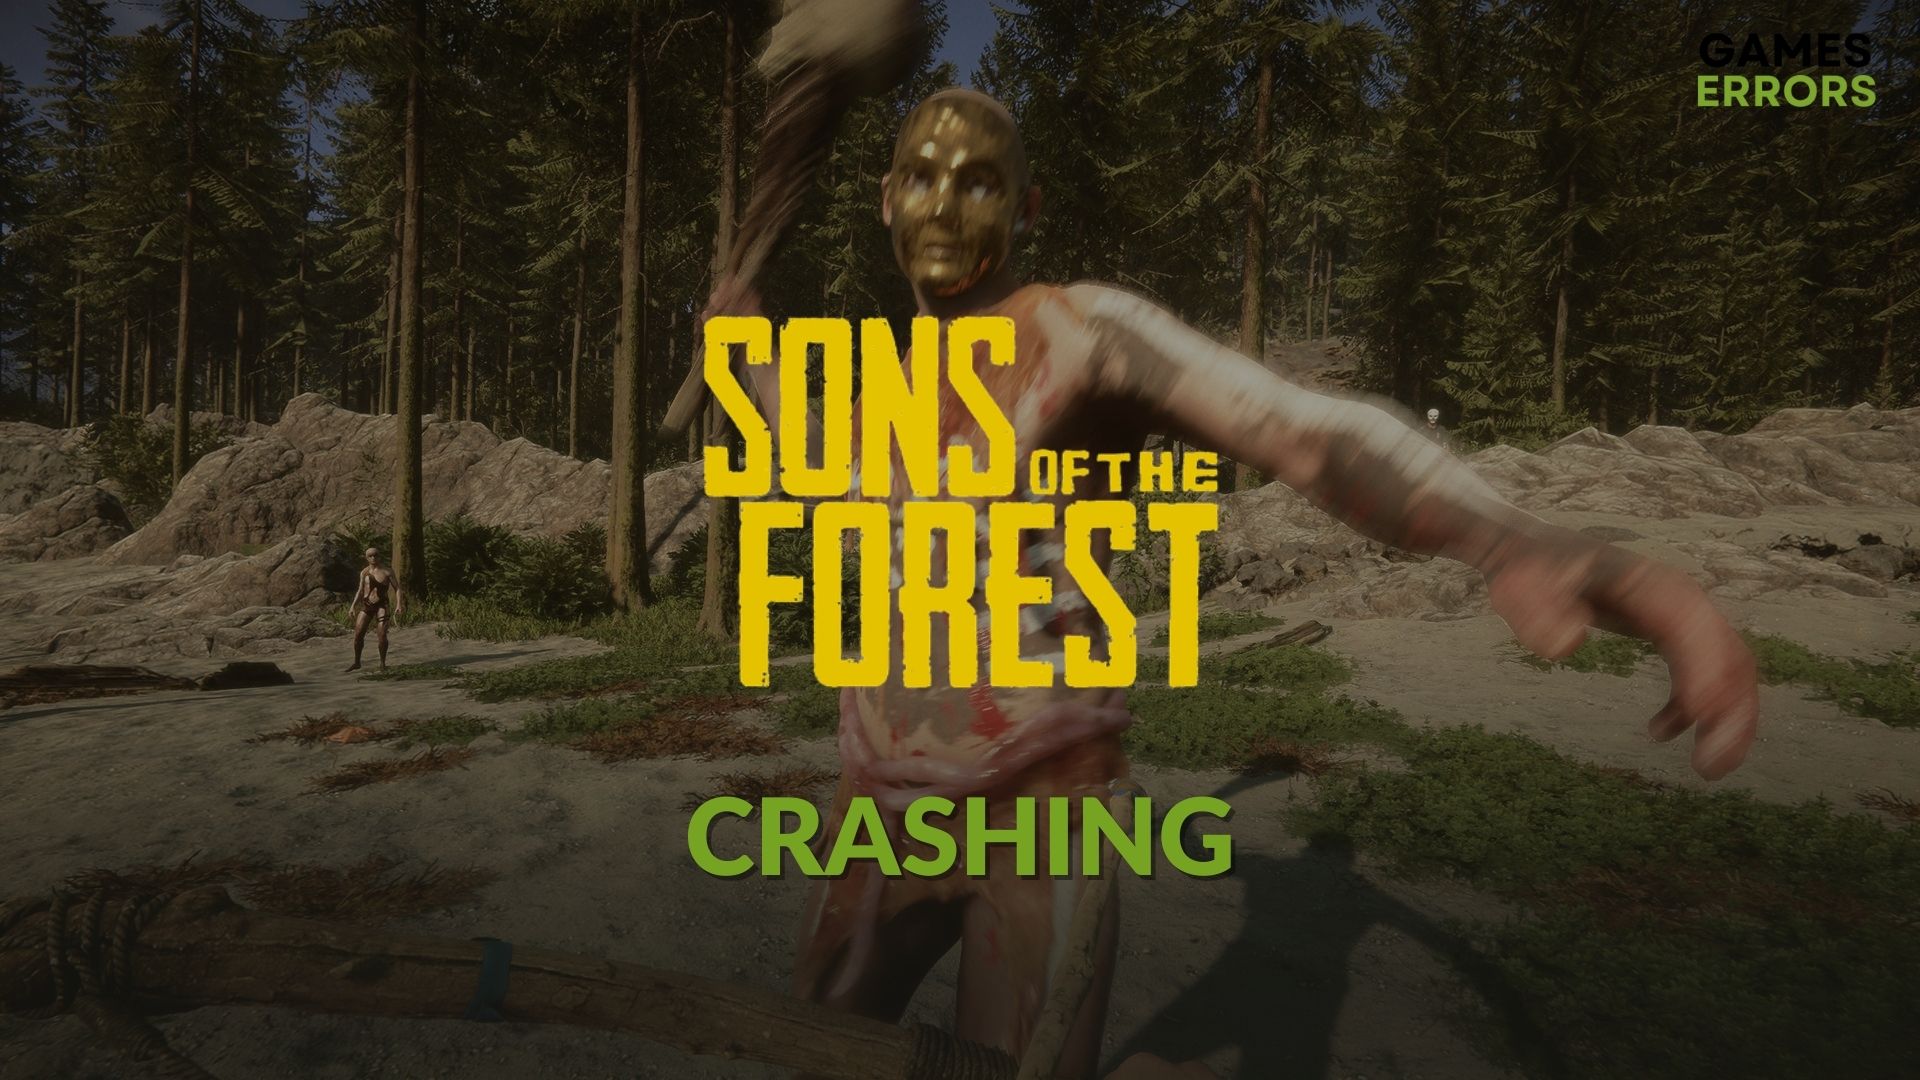 how to fix Sons of the Forest crashing pc